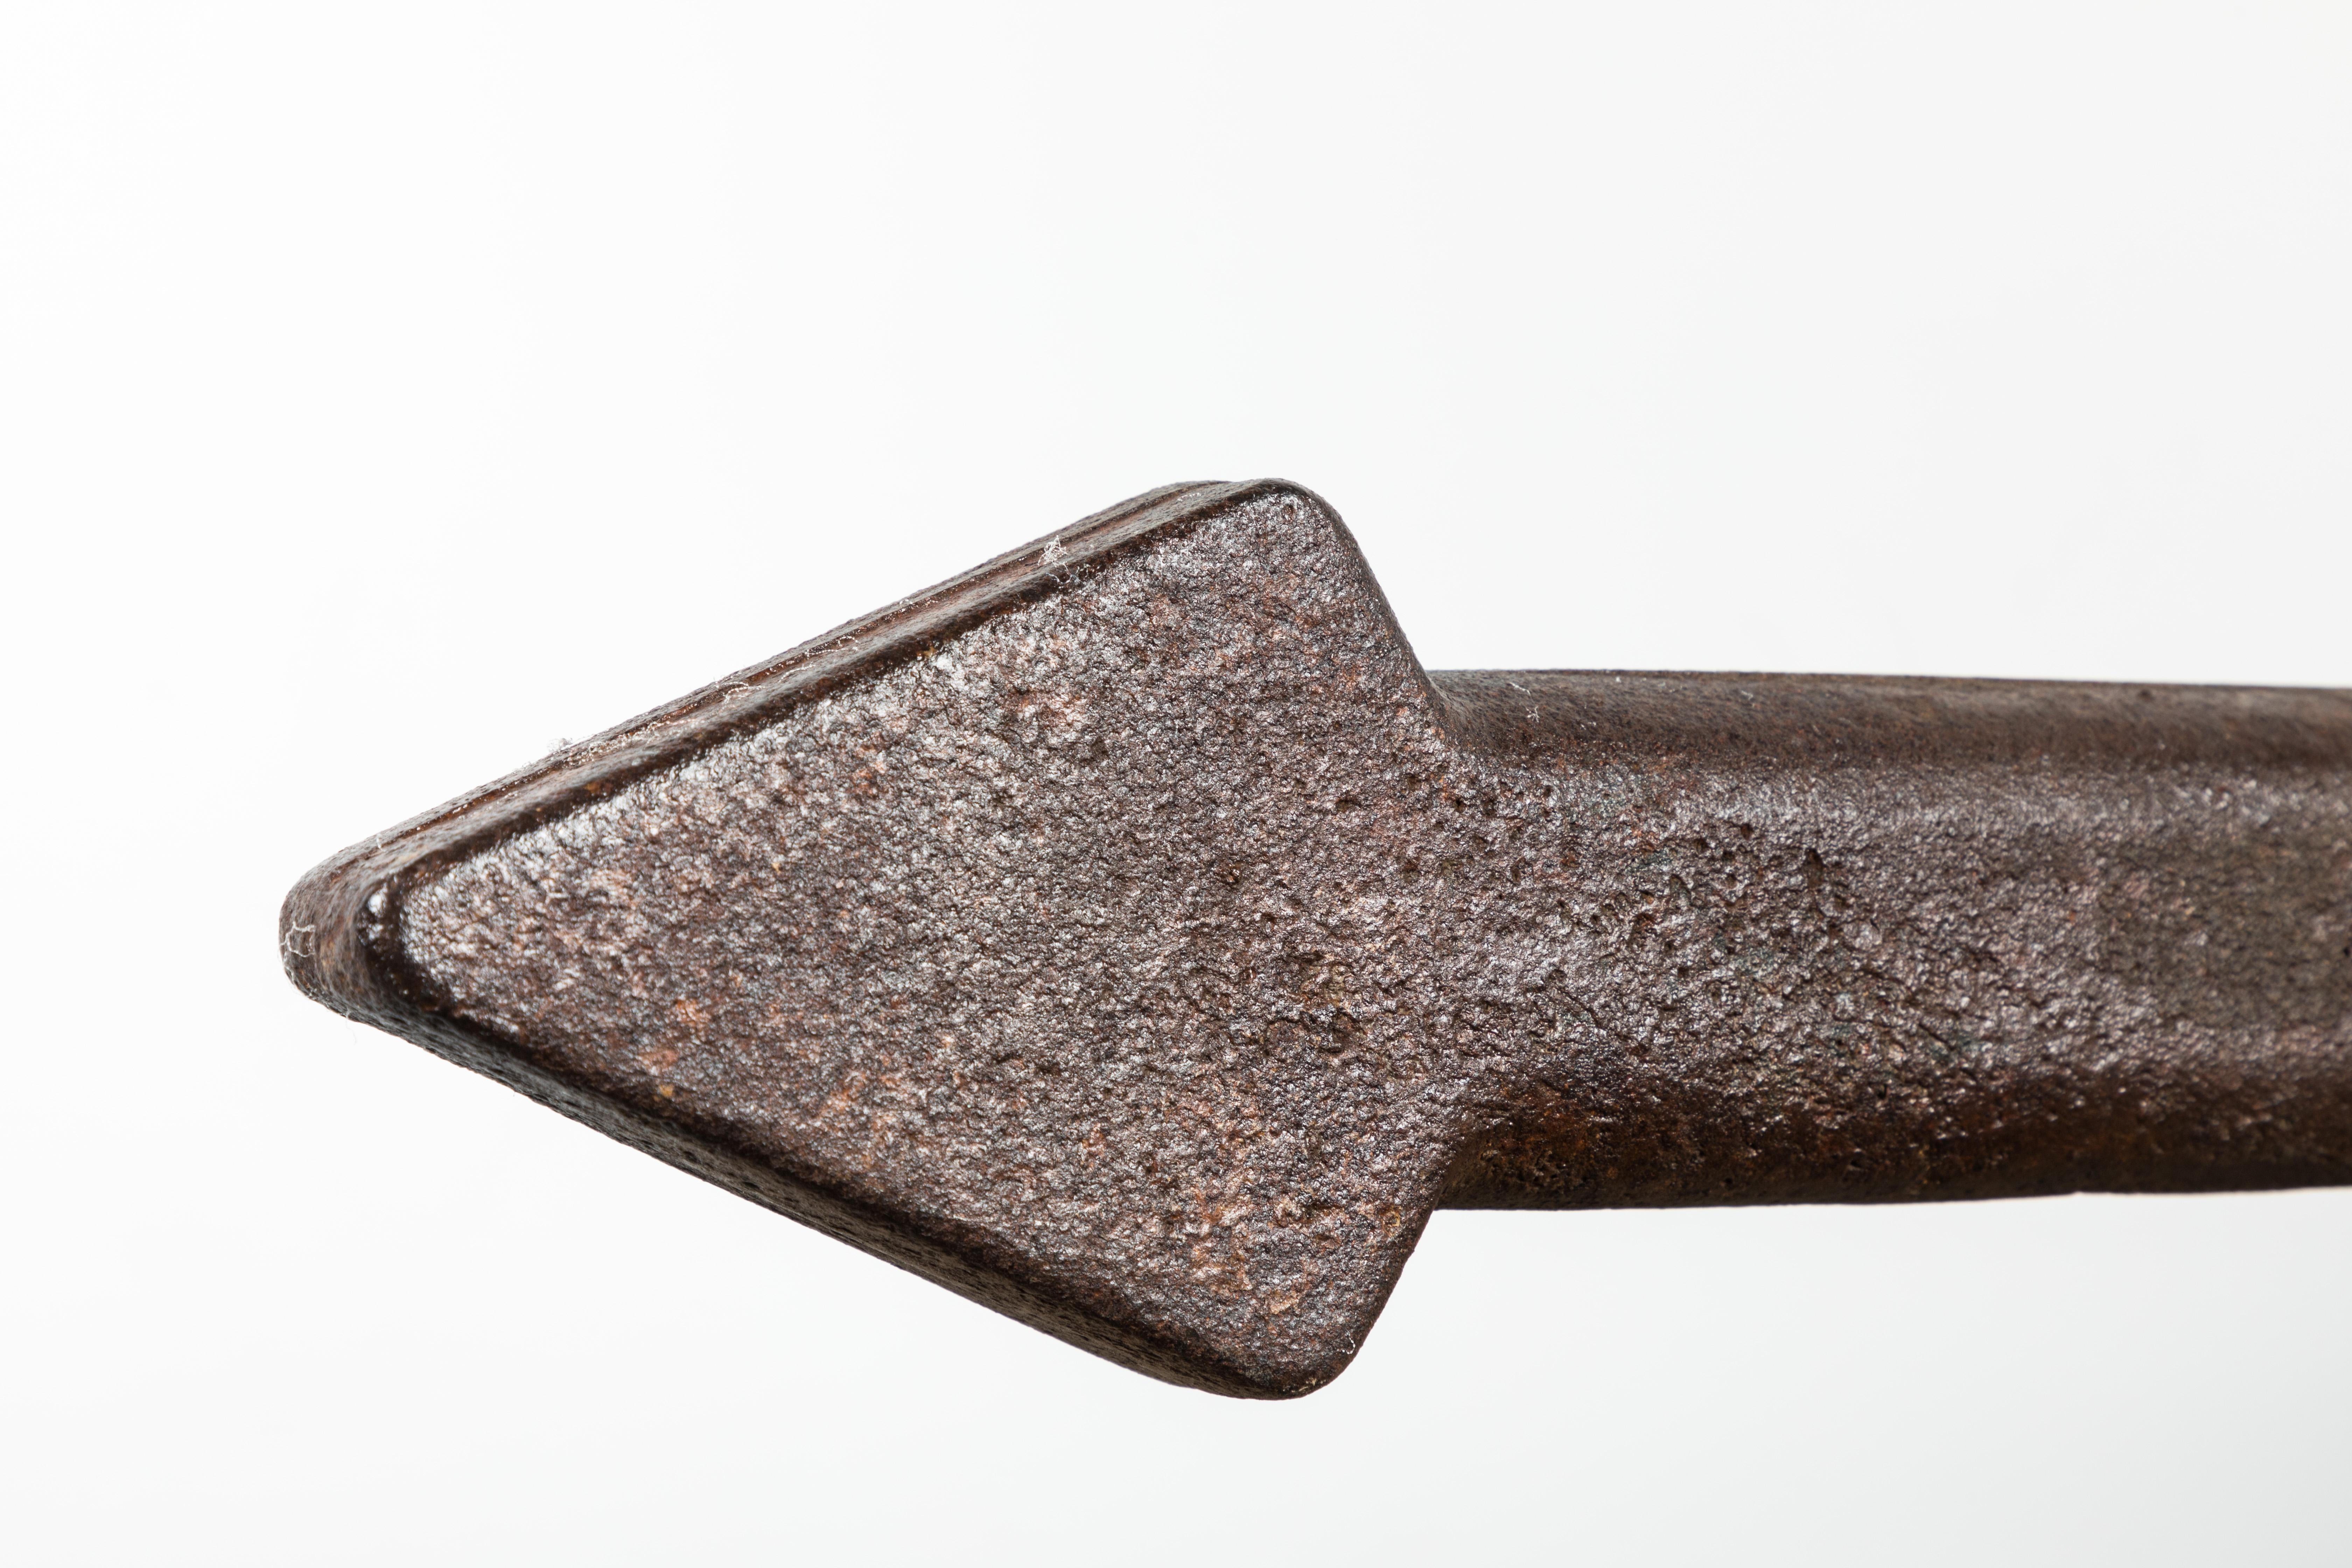 Fantastic chunky 19th century hand-forged iron arrow. Great shelf decoration. Could be wall mounted. Very solid piece.